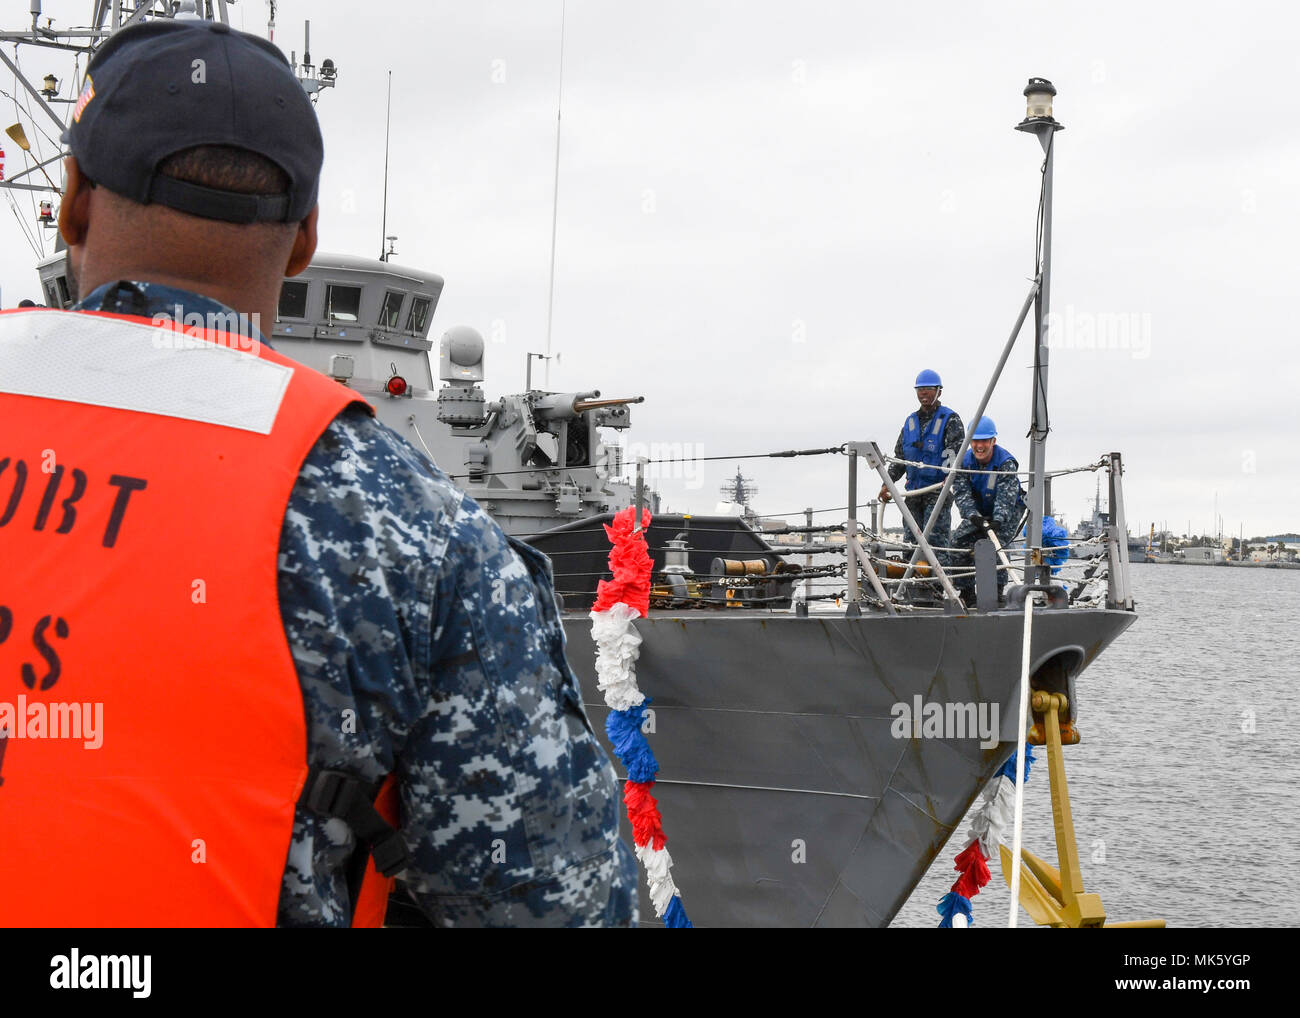 171110-N-NY430-034 JACKSONVILLE, Fla. (Nov. 10, 2017) Cyclone-class coastal patrol ship USS Zephyr (PC 8) returns to Naval Station Mayport following a 76-day patrol in support of U.S. 4th Fleet area of operations. Working with partner nations participating in Operation Martillo, a partnership to target illicit drug trafficking routes in the waters off Central America, Zephyr seized 726 kilograms of cocaine valued at approximately $17-26 million in street value. (U.S. Navy photo by Mass Communication Specialist 3rd Class Kristopher S. Haley/ Released) Stock Photo